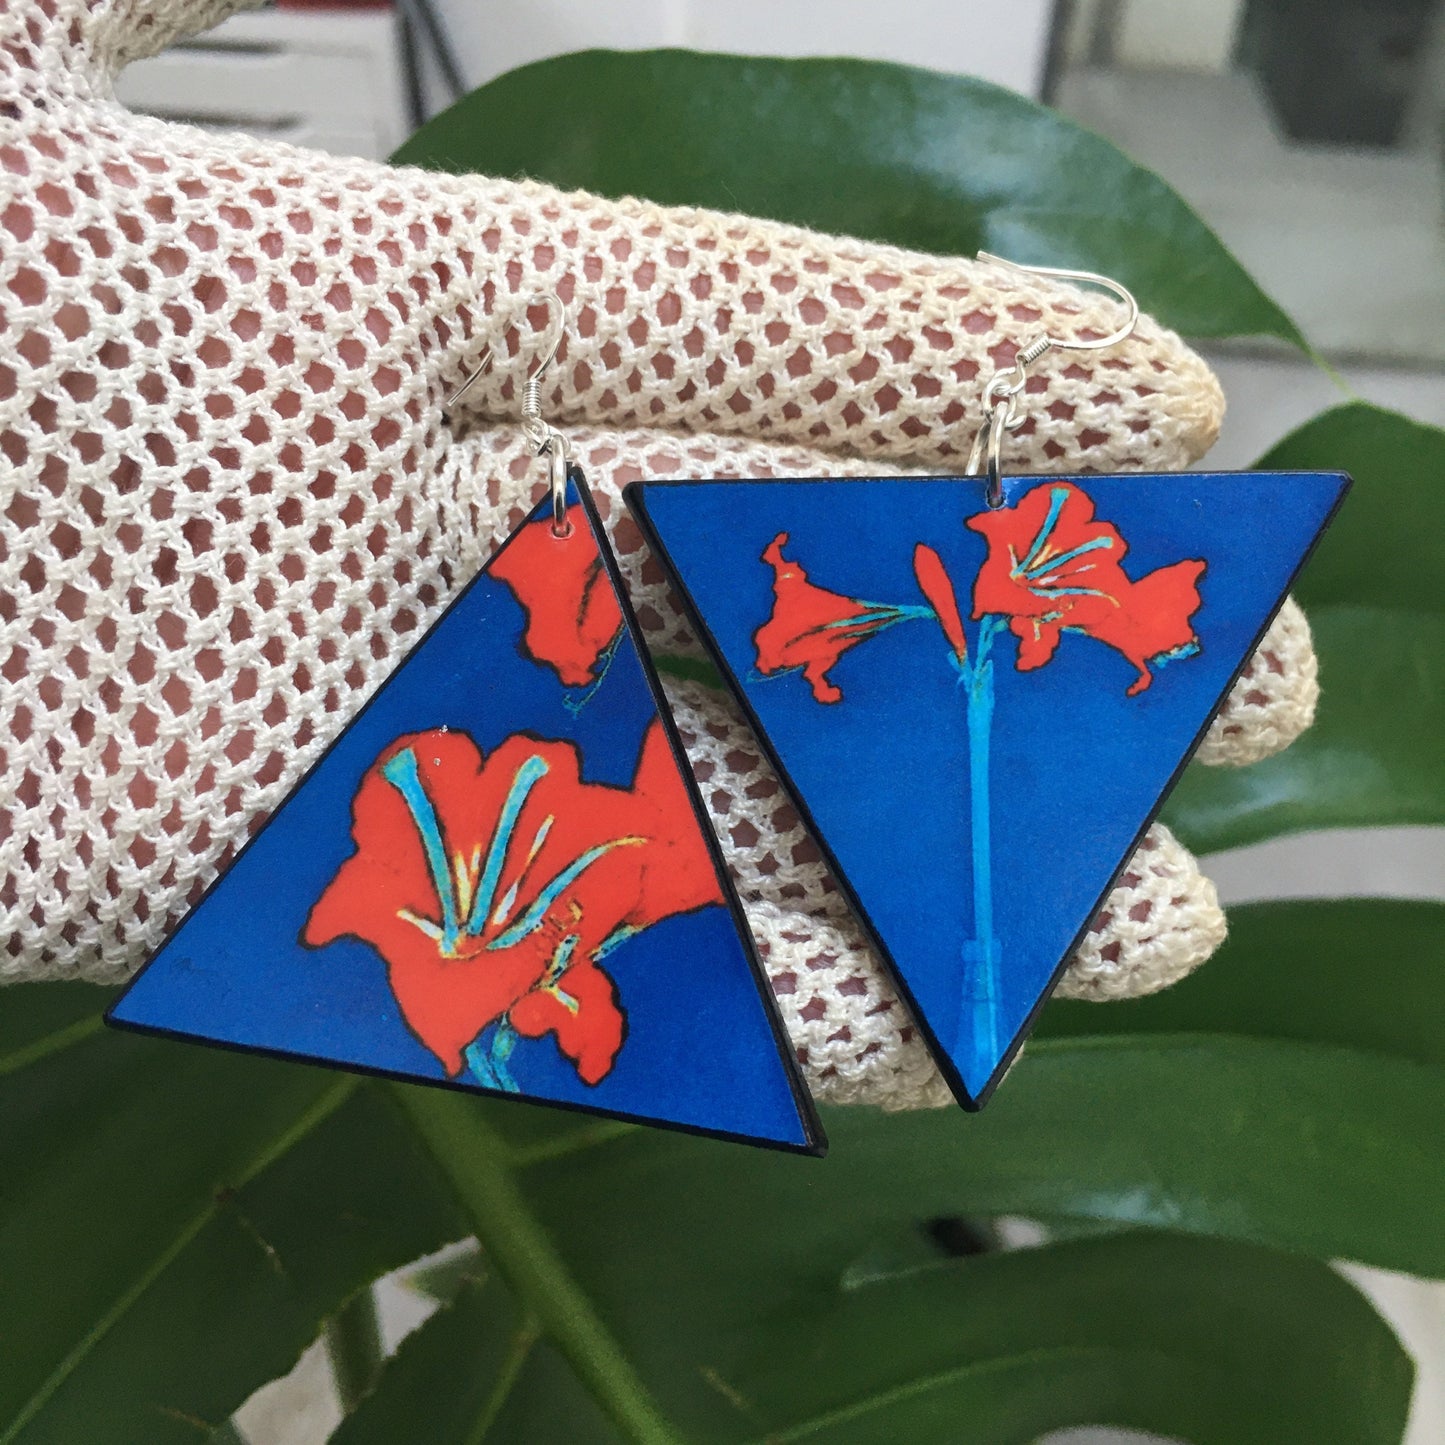 Triangle earrings with an art detail of Mondrian painting. Red  flowers and blue color. Sustainable handmade earrings on wood by Obljewellery.